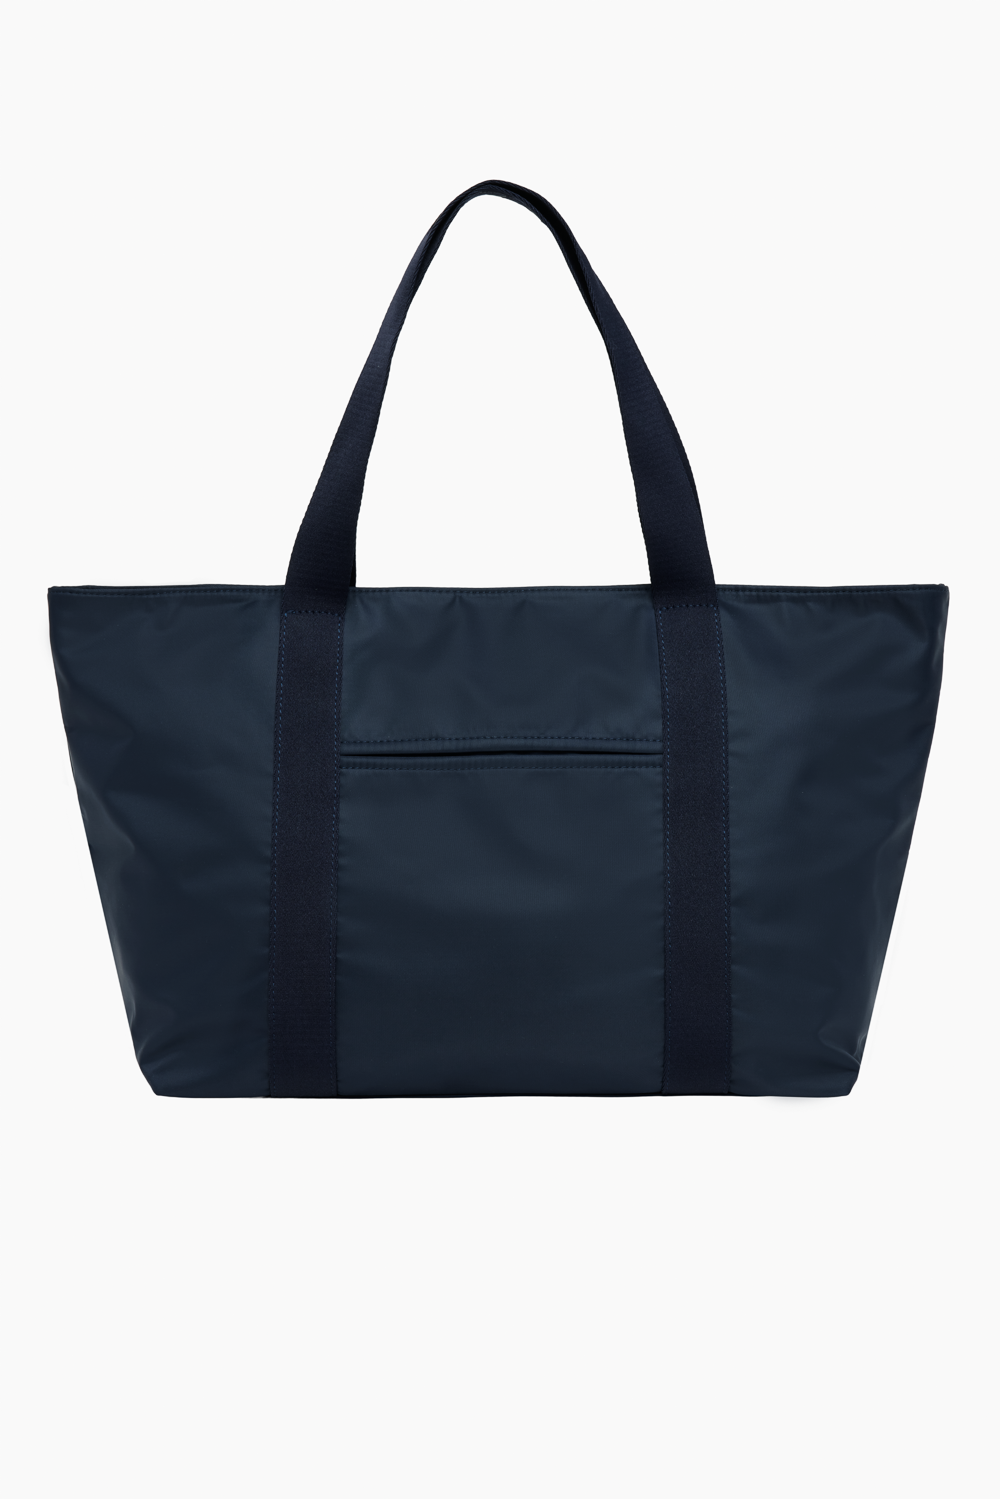 EVERYWHERE TOTE - OXFORD Featured Image